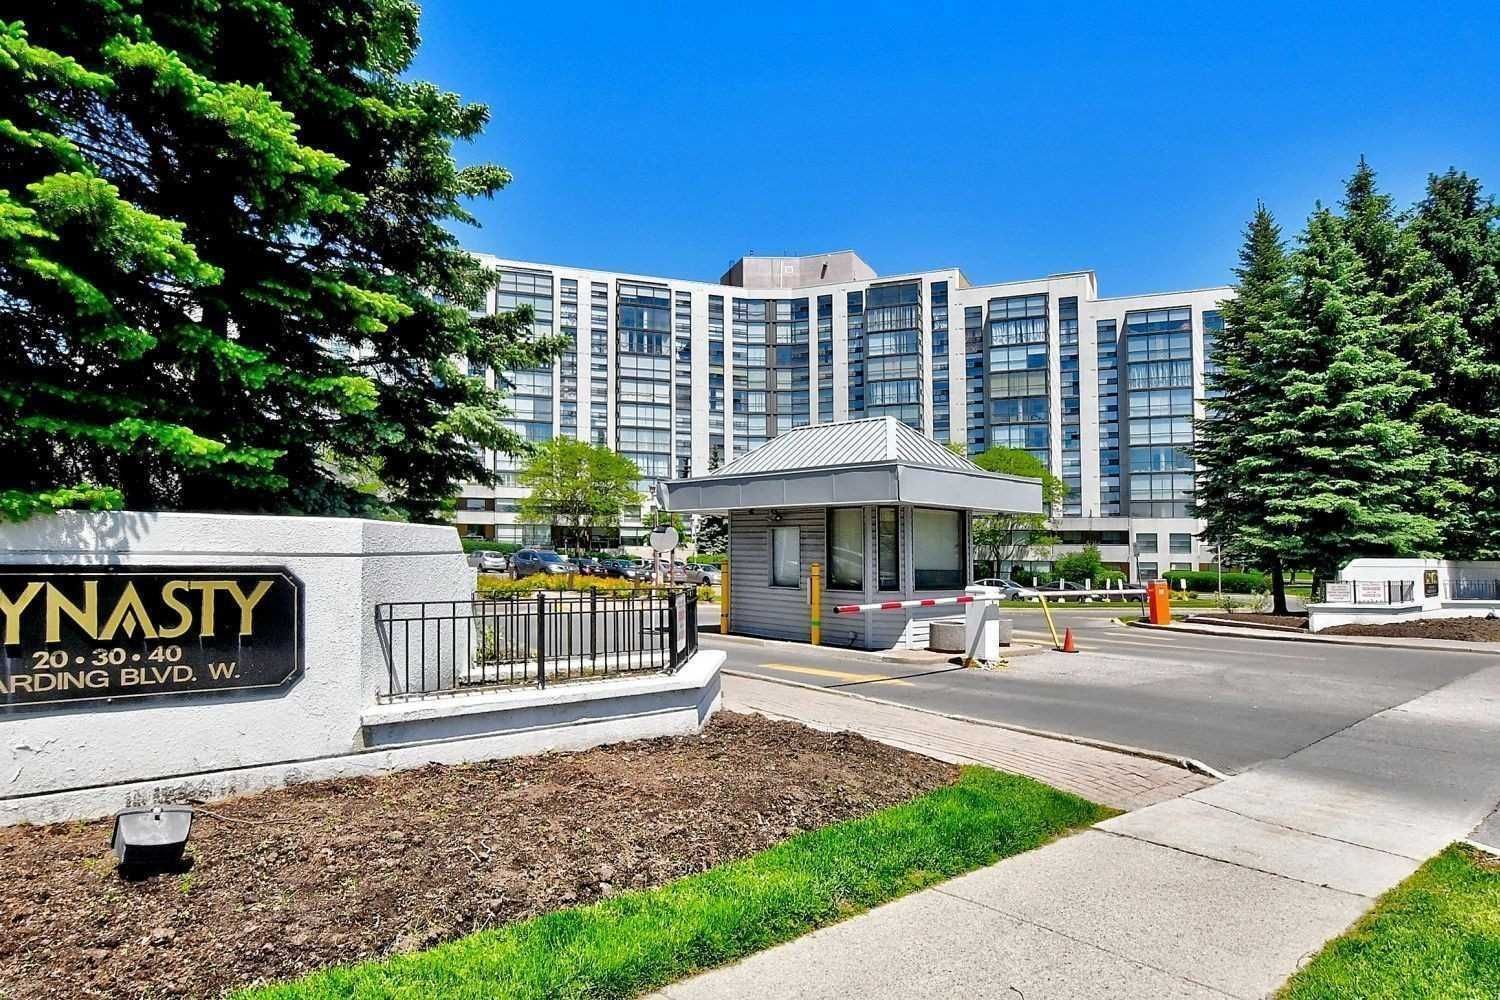 40 Harding Boulevard W. The Dynasty II Condos is located in  Richmond Hill, Toronto - image #3 of 3